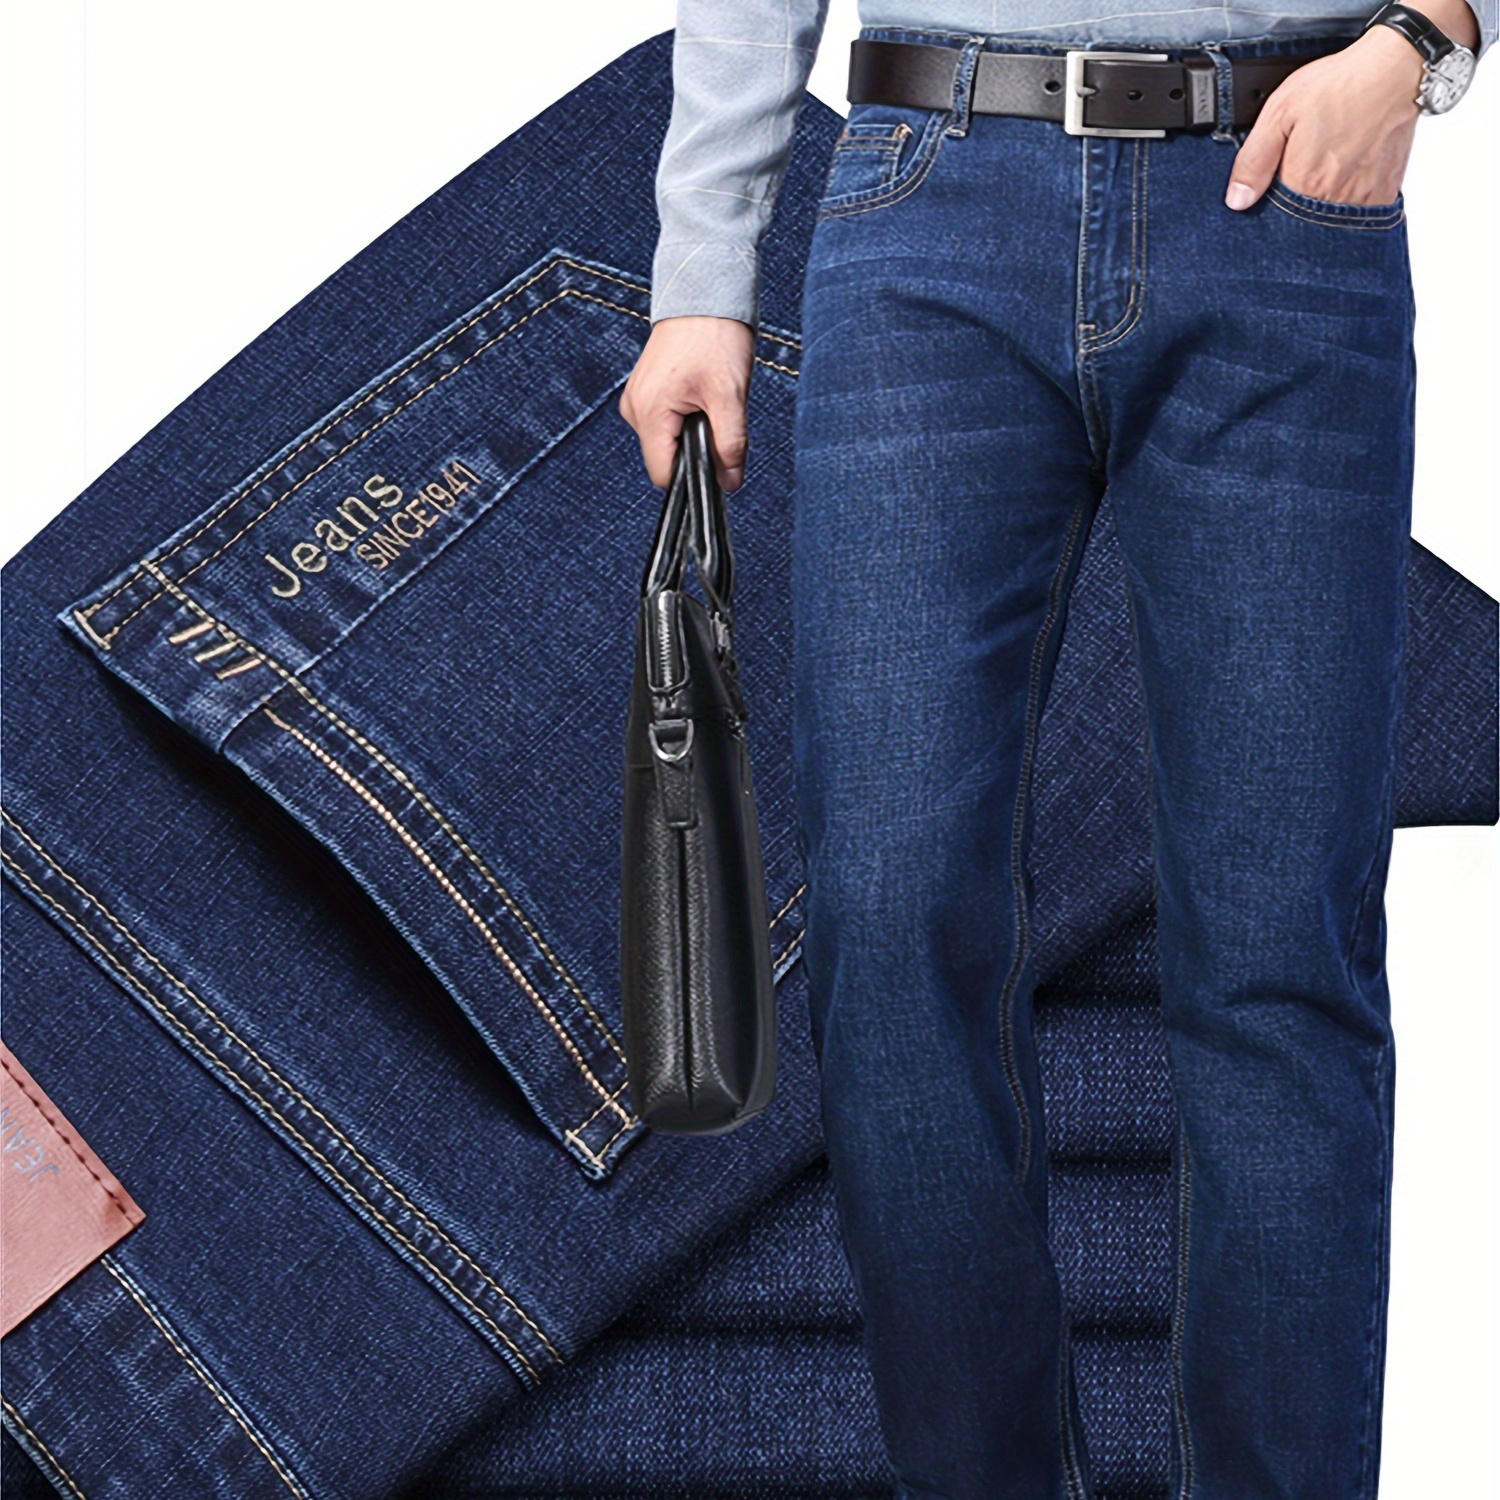 

Men's Solid Denim Trousers With Pockets, Causal Cotton Blend Jeans For Outdoor Activities